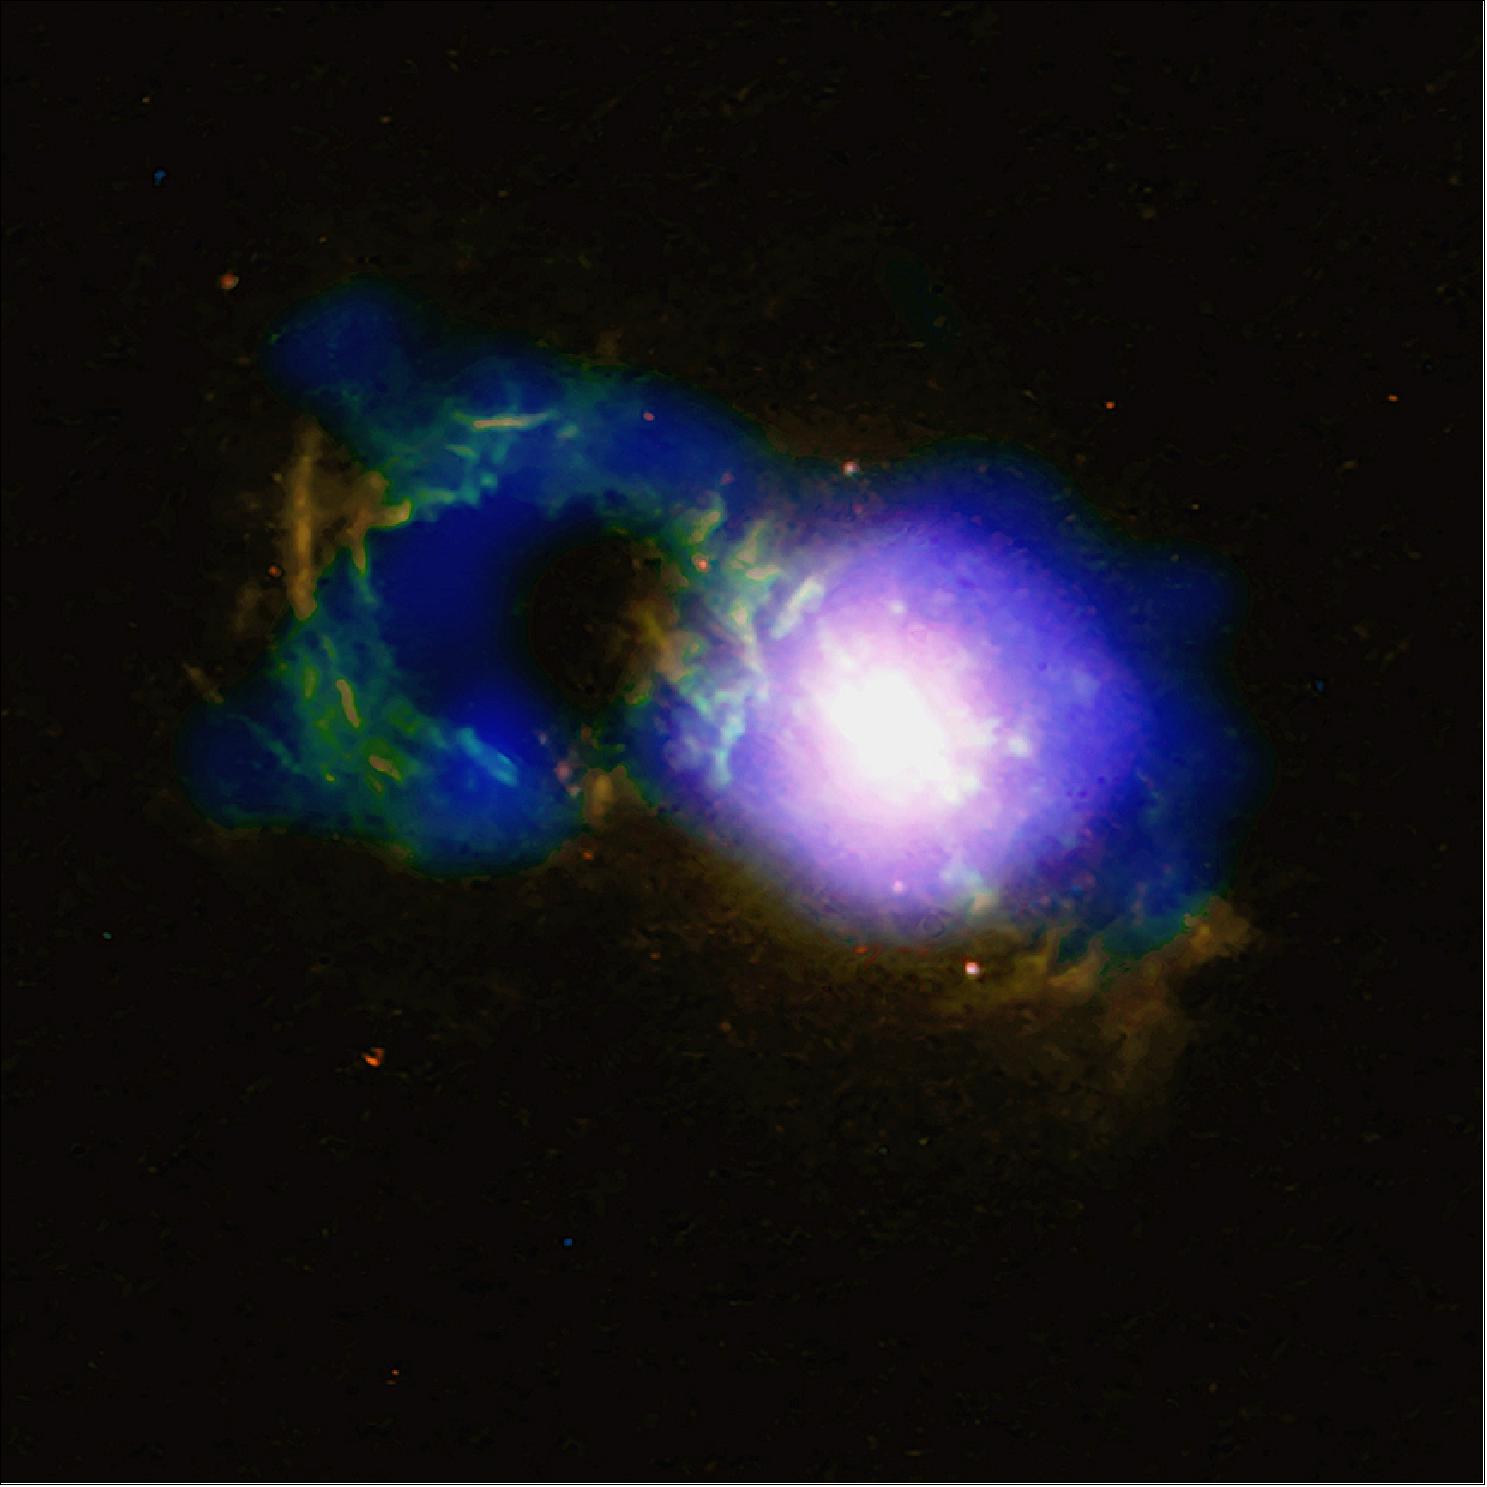 Figure 57: In the image shown here the X-ray data is colored in blue and optical observations from the NASA/ESA Hubble Space Telescope are shown in red and green. Another image including radio data also shows a second ‘handle’ on the other side of the 'cup' (image credit: X-ray: NASA/CXC/University of Cambridge/G. Lansbury et al; optical: NASA/STScI/W. Keel et al.)